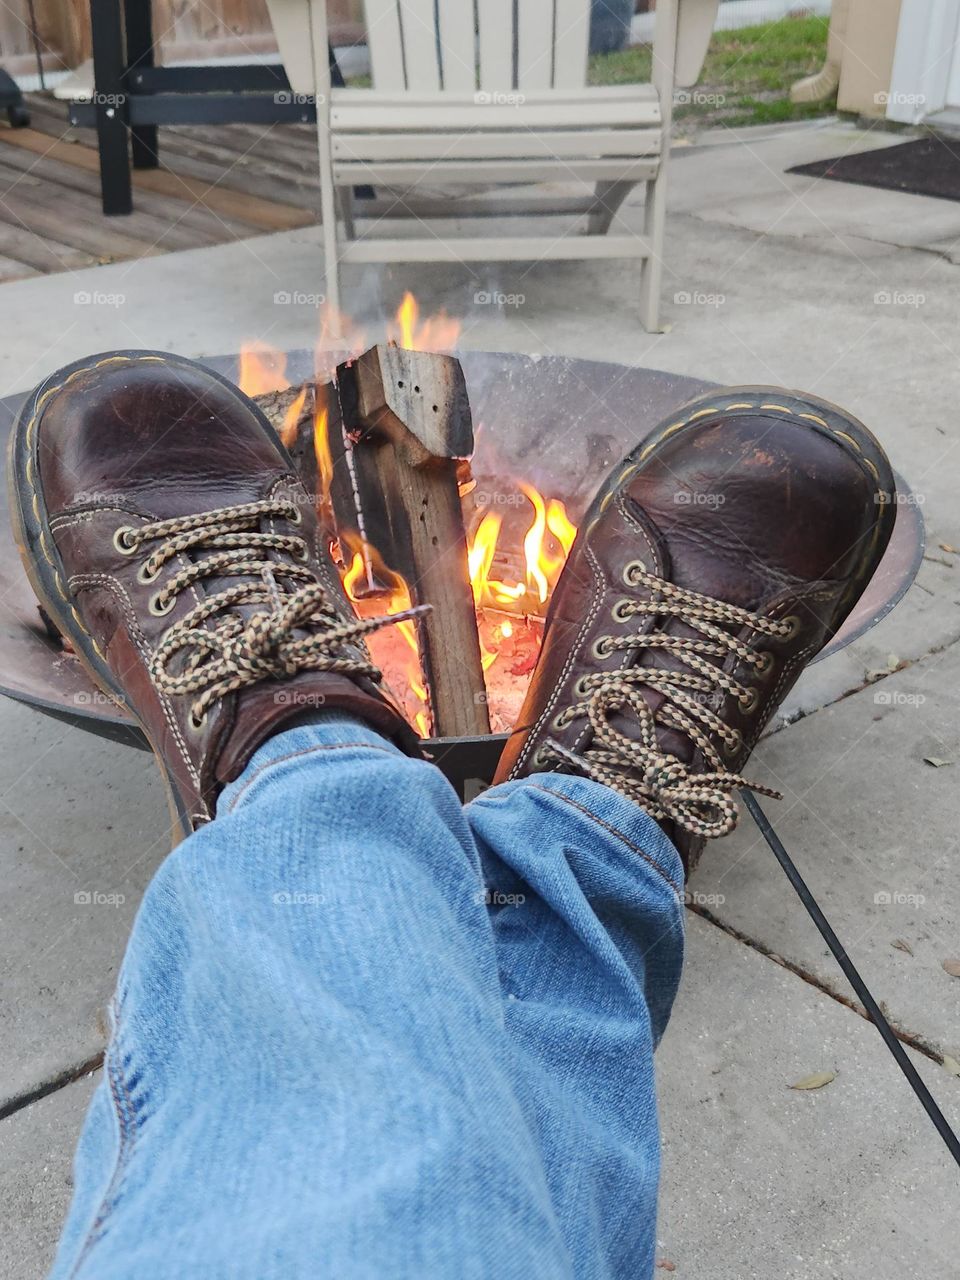 Lounging outside by the fire pit in my Docs